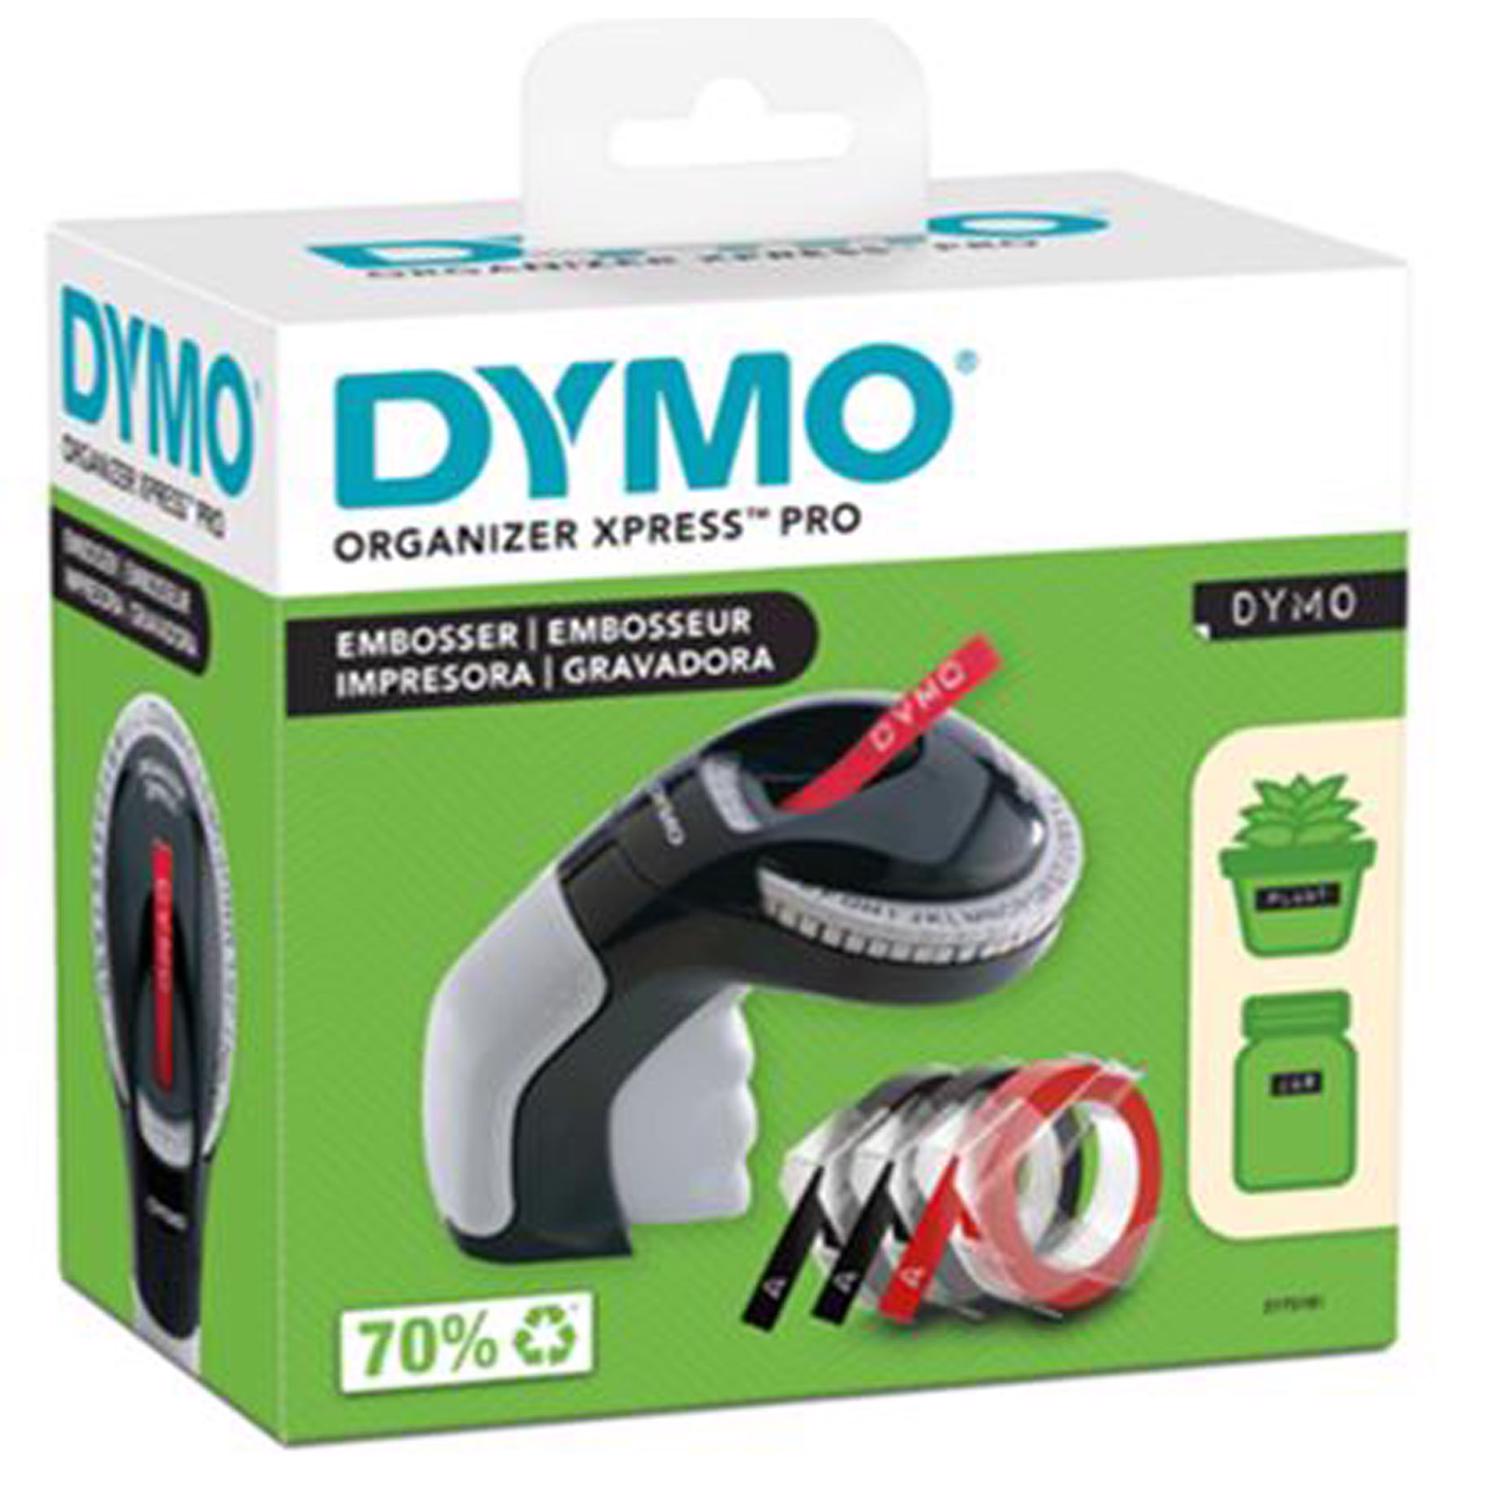 Photos - Accessory DYMO Organizer Xpress Manual Embossing Label Maker 2175191 